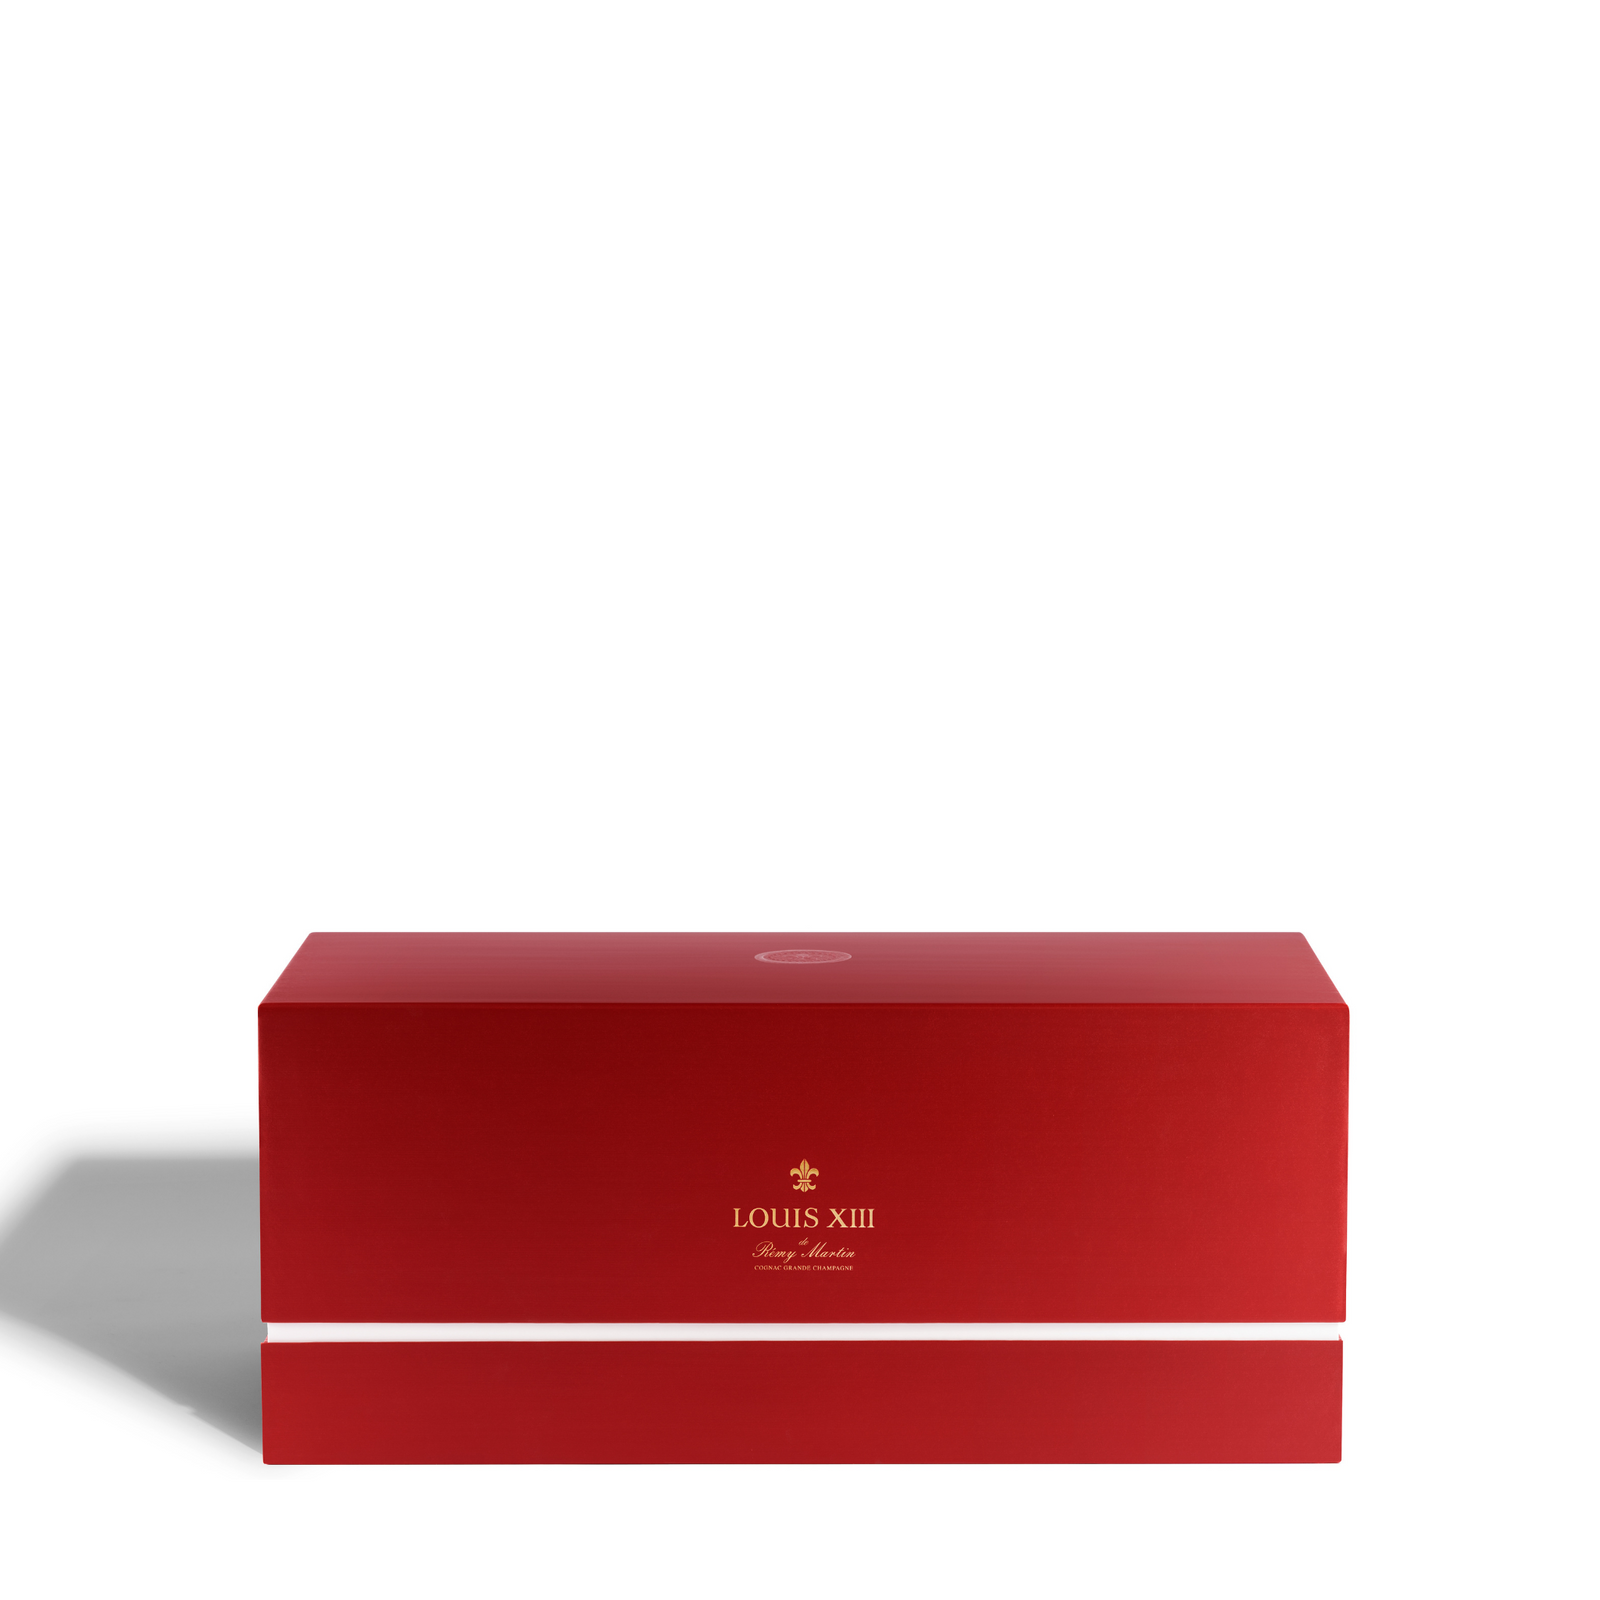 A packshot of the red packaging of the expert set